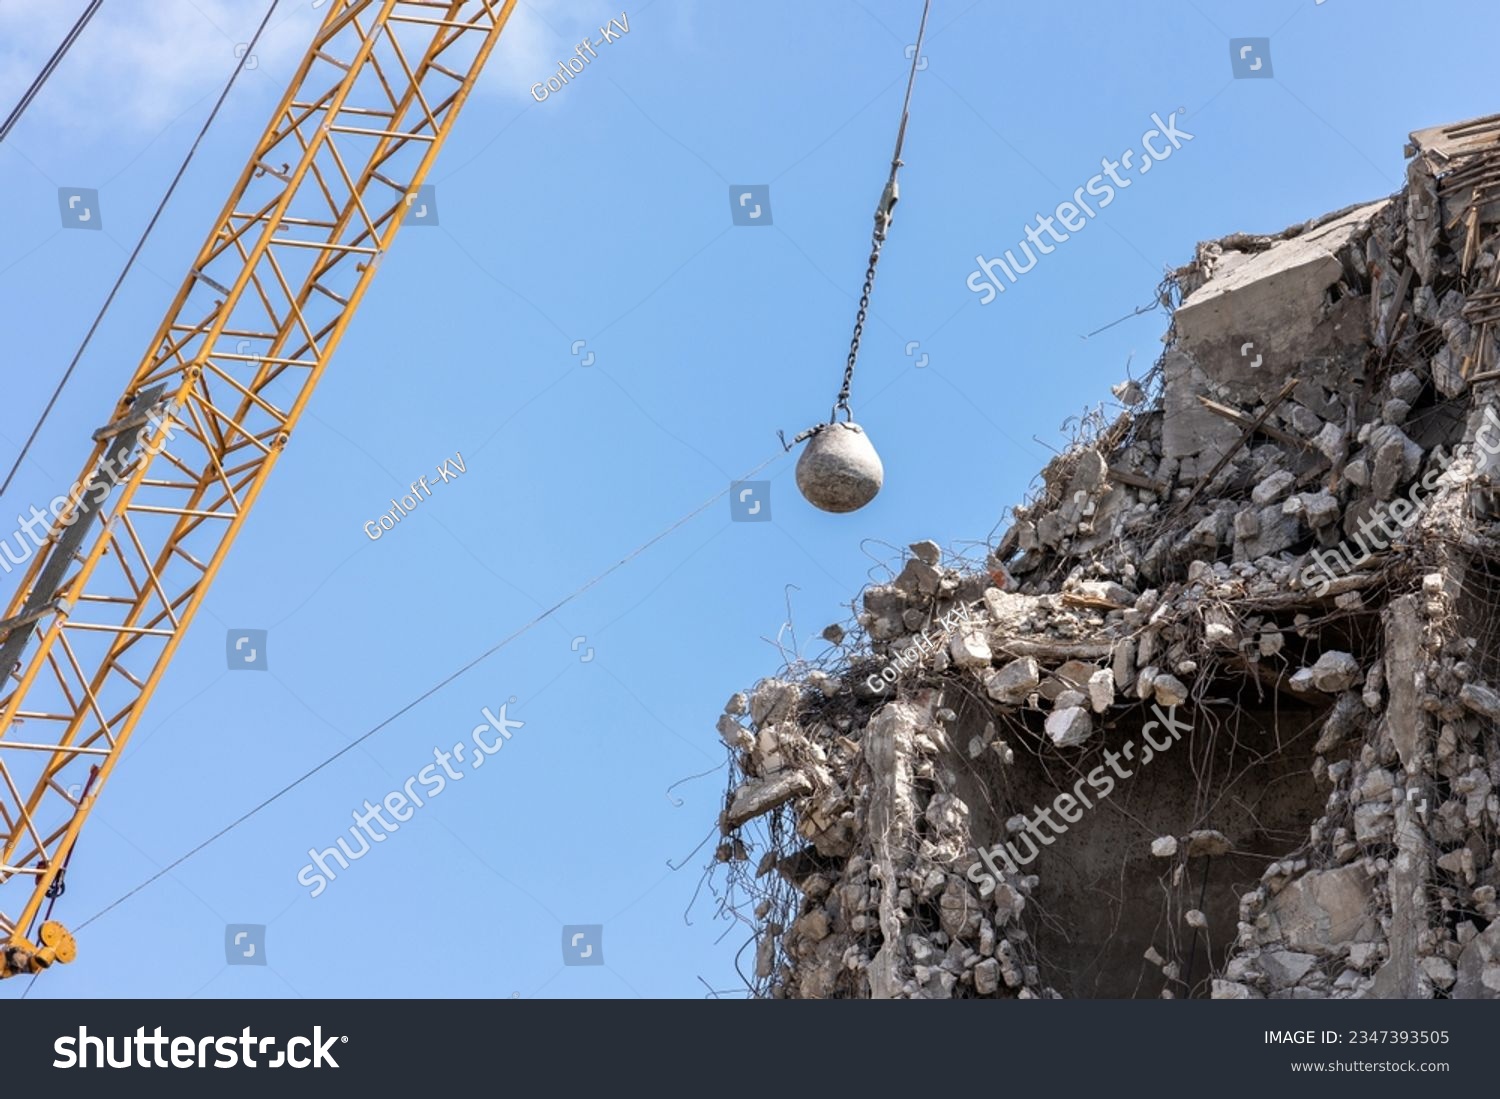 Heavy wrecking ball crane demolishing old building against blue sky in Magdeburg Germany. Building dismantling and construction waste disposal recycling service #2347393505